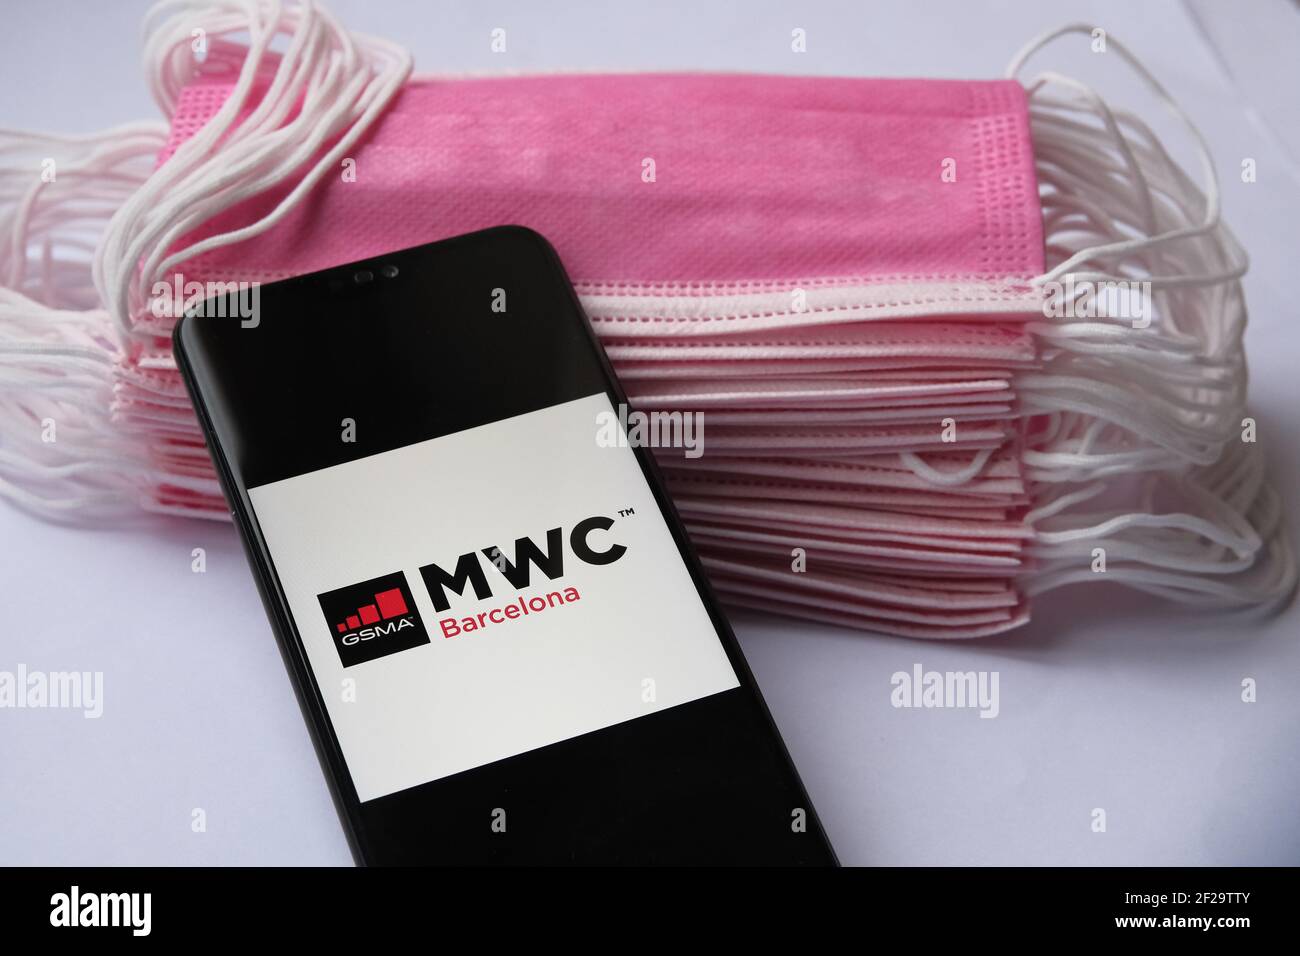 Mobile World Congress Barcelona logo seen on the screen of smartphone and pile of face masks on the background. Concept for event during COVID pandemi Stock Photo